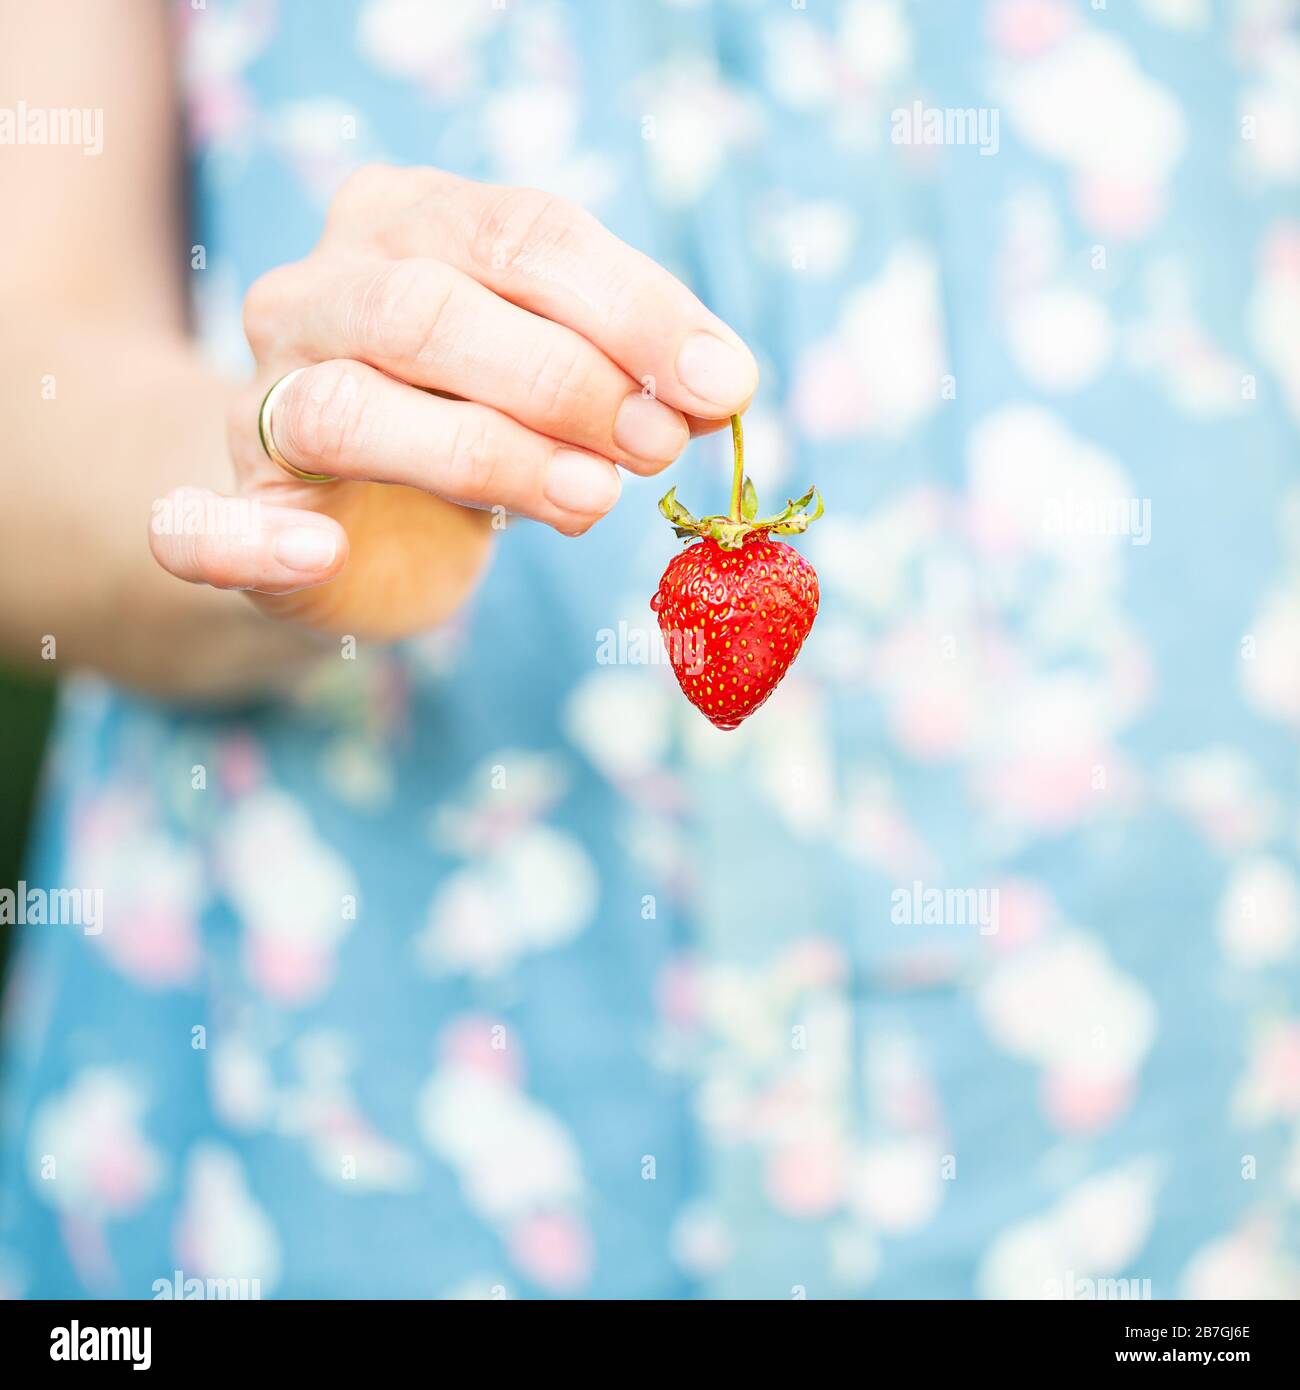 A woman holding a strawberry in her hand Stock Photo